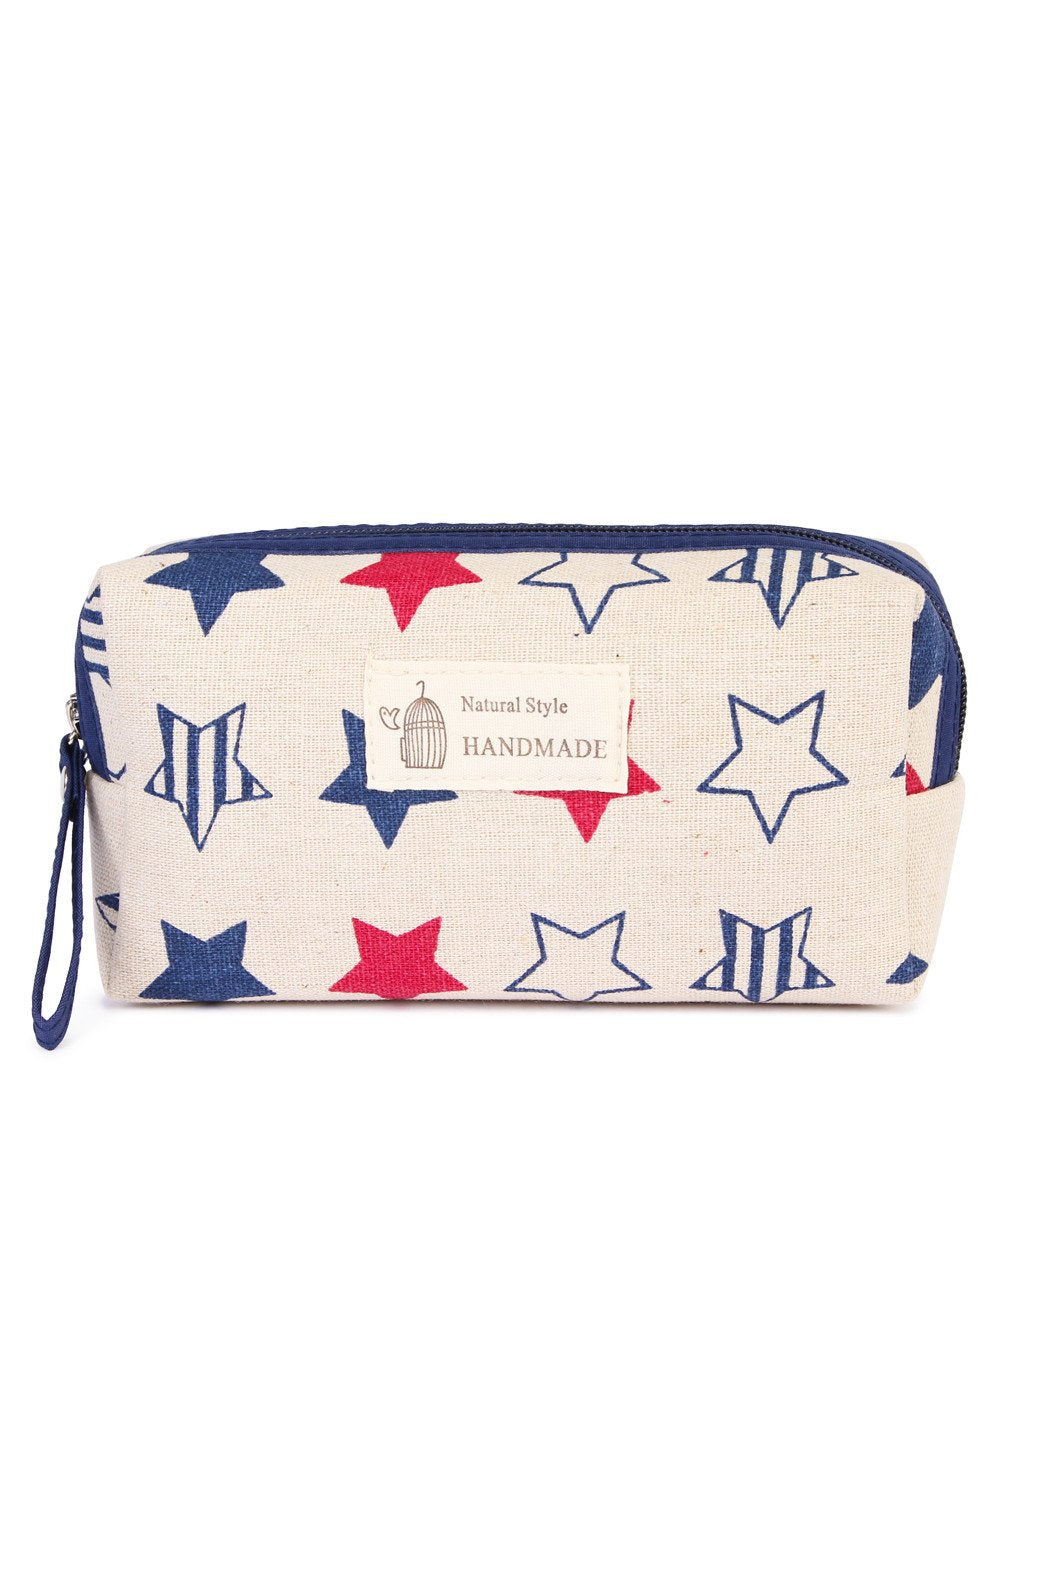 J122-7 - Stars Cosmetic Pouch